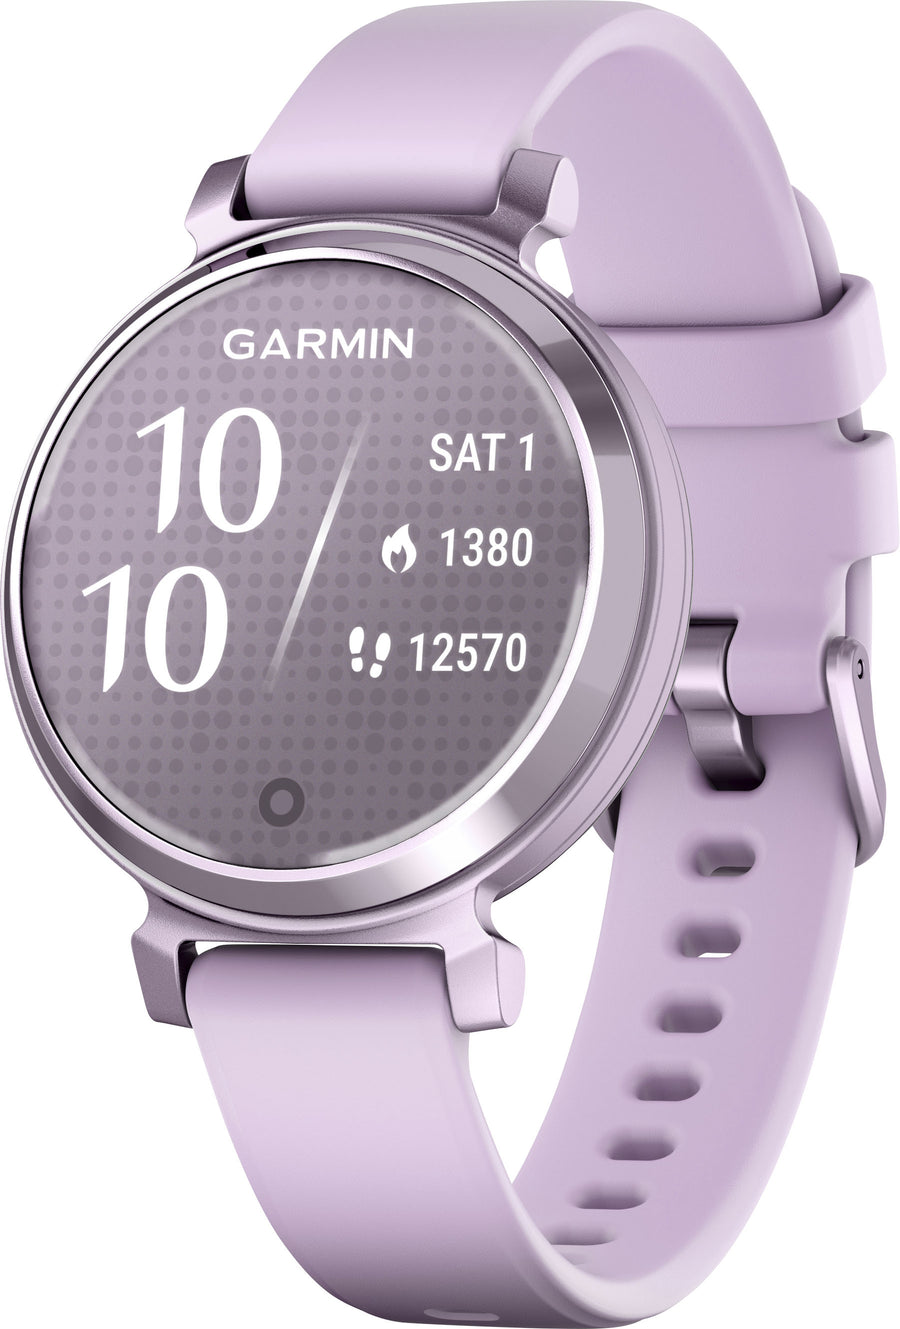 Garmin - Lily 2 Smartwatch 34 mm Anodized Aluminum - Metallic Lilac with Lilac Silicone Band_0